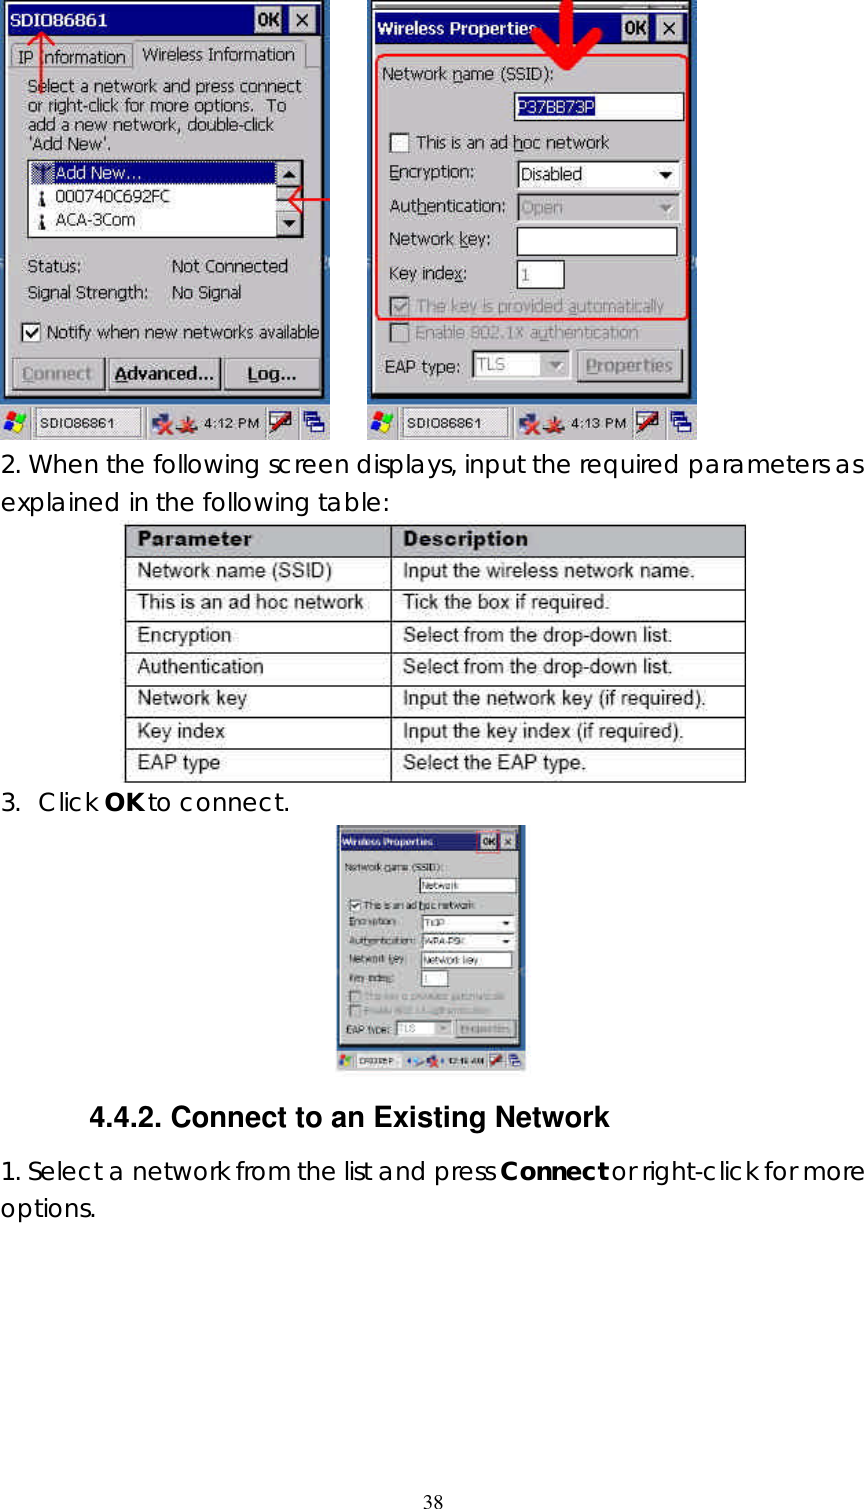  38     2. When the following screen displays, input the required parameters as explained in the following table:  3. Click OK to connect.  4.4.2. Connect to an Existing Network 1. Select a network from the list and press Connect or right-click for more options. 